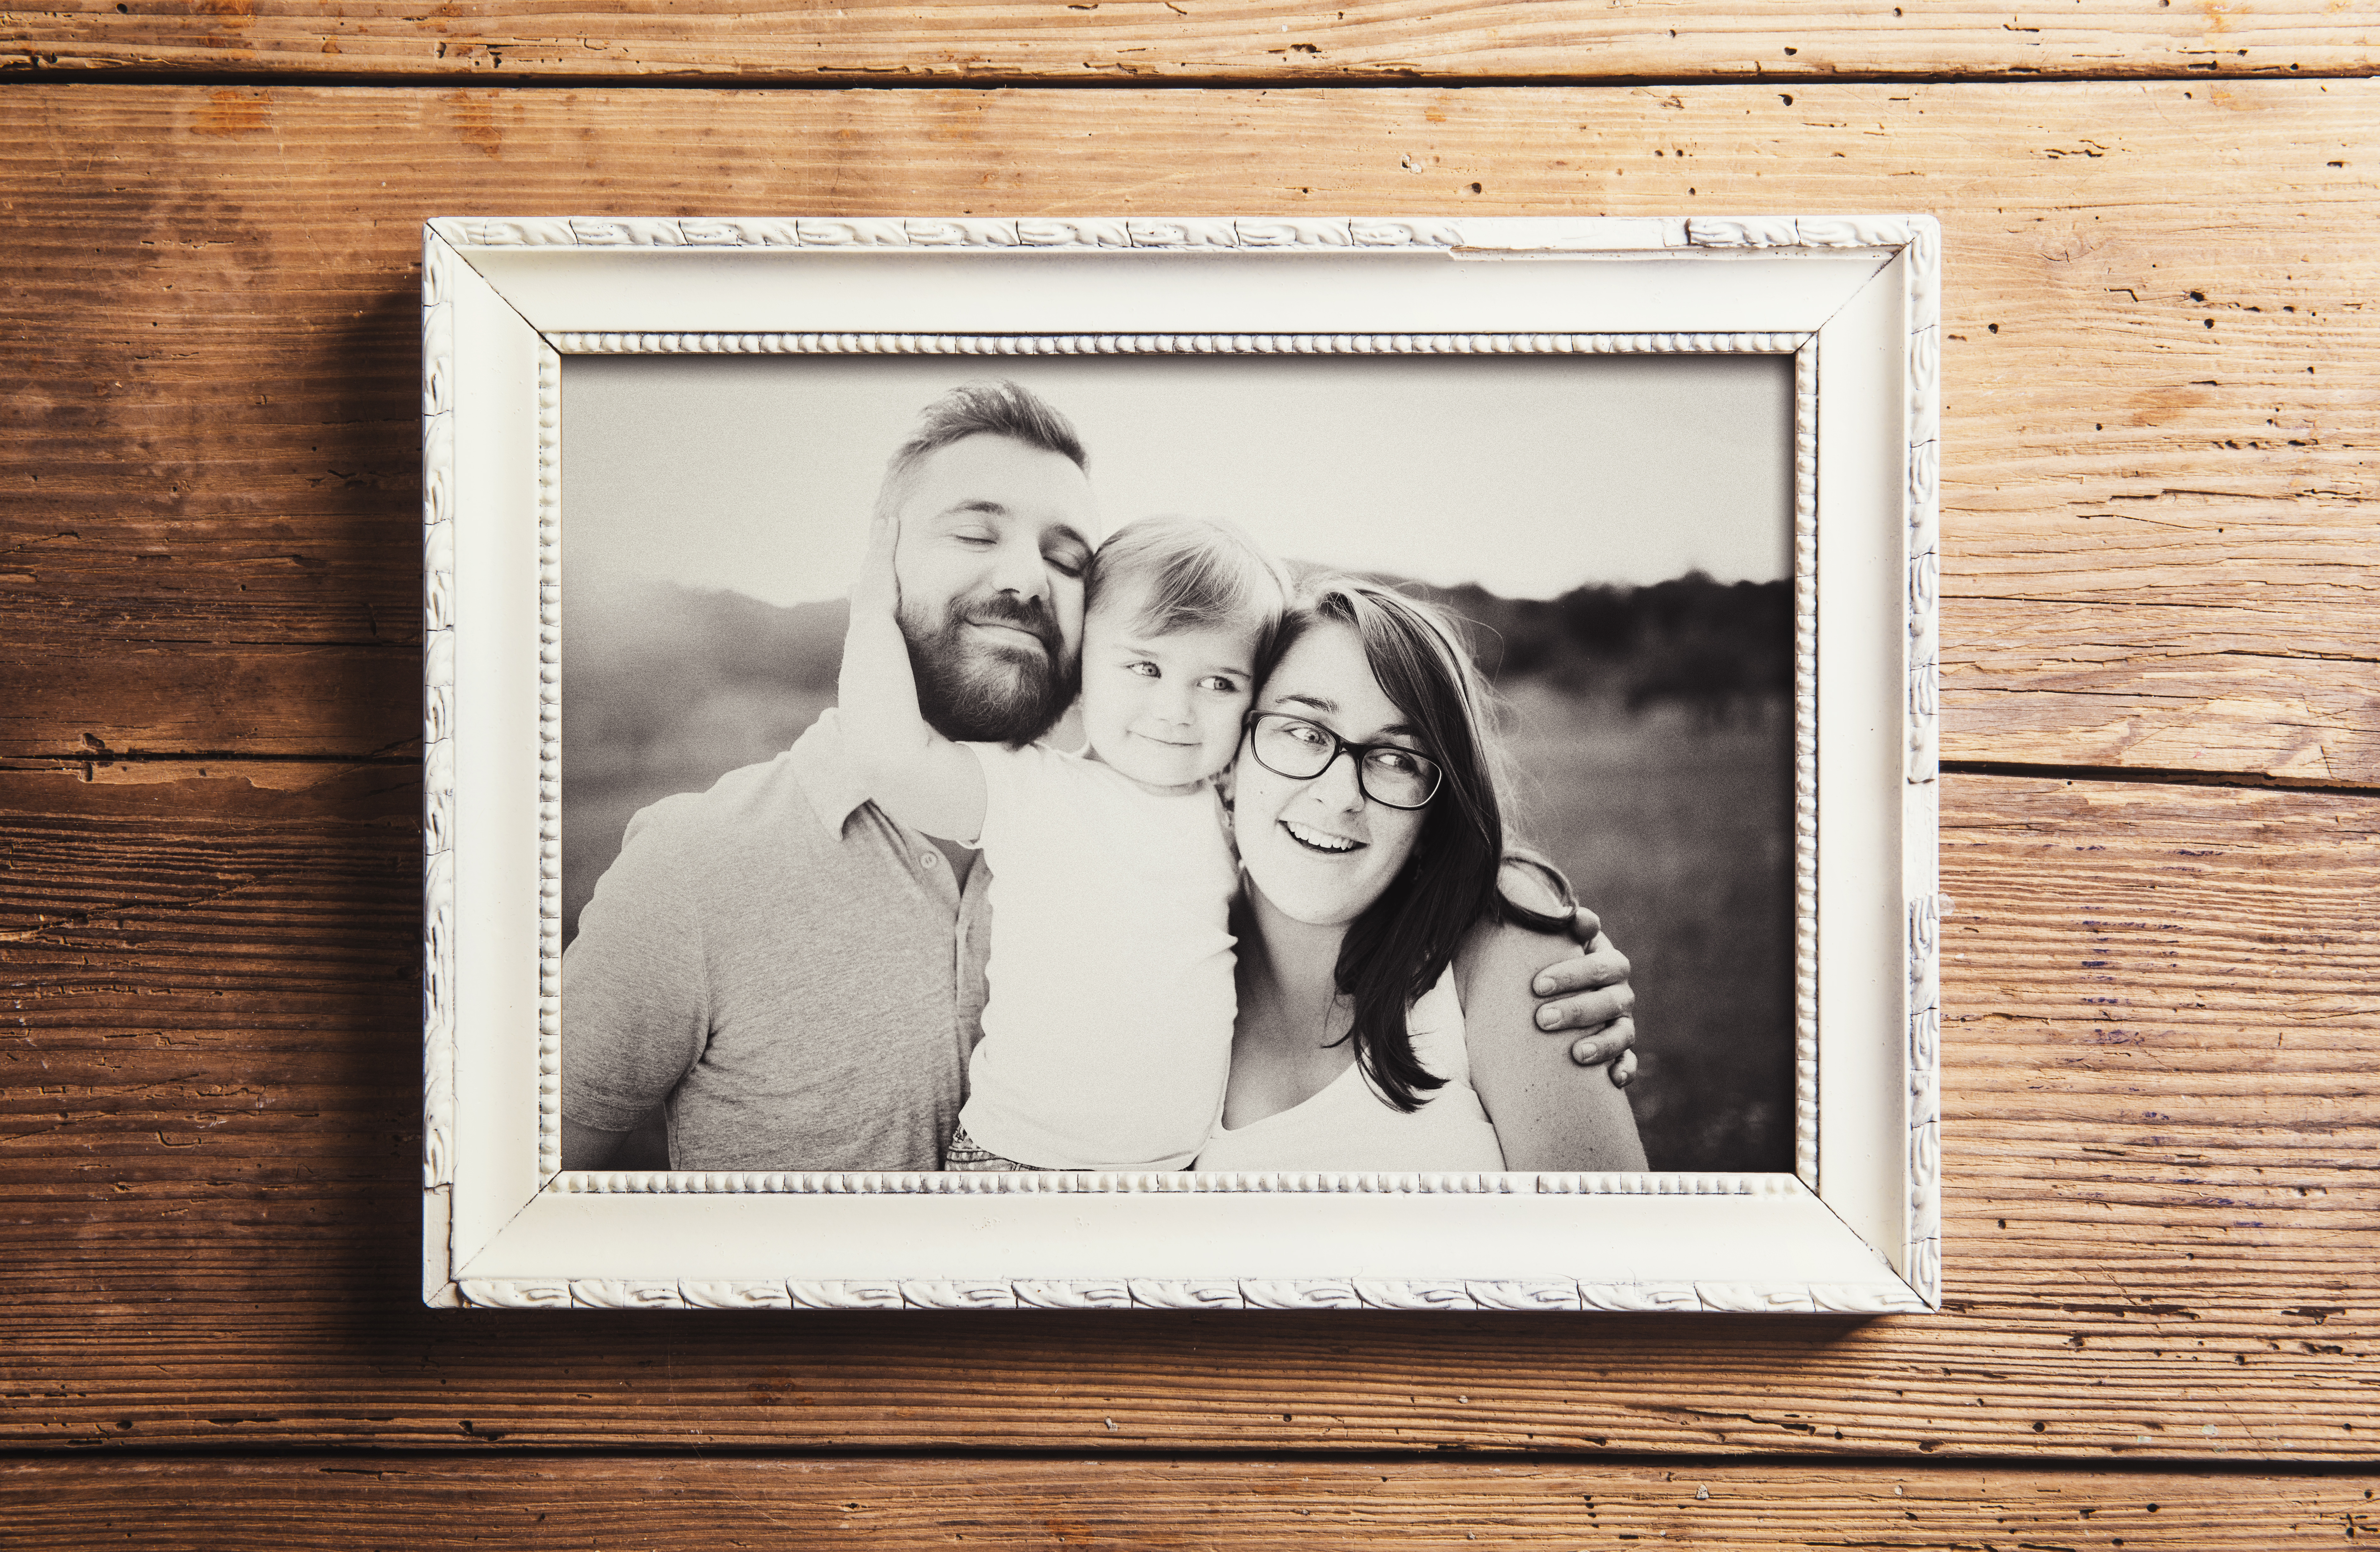 A grayscale photograph of a family of three in a wooden frame | Source: Shutterstock